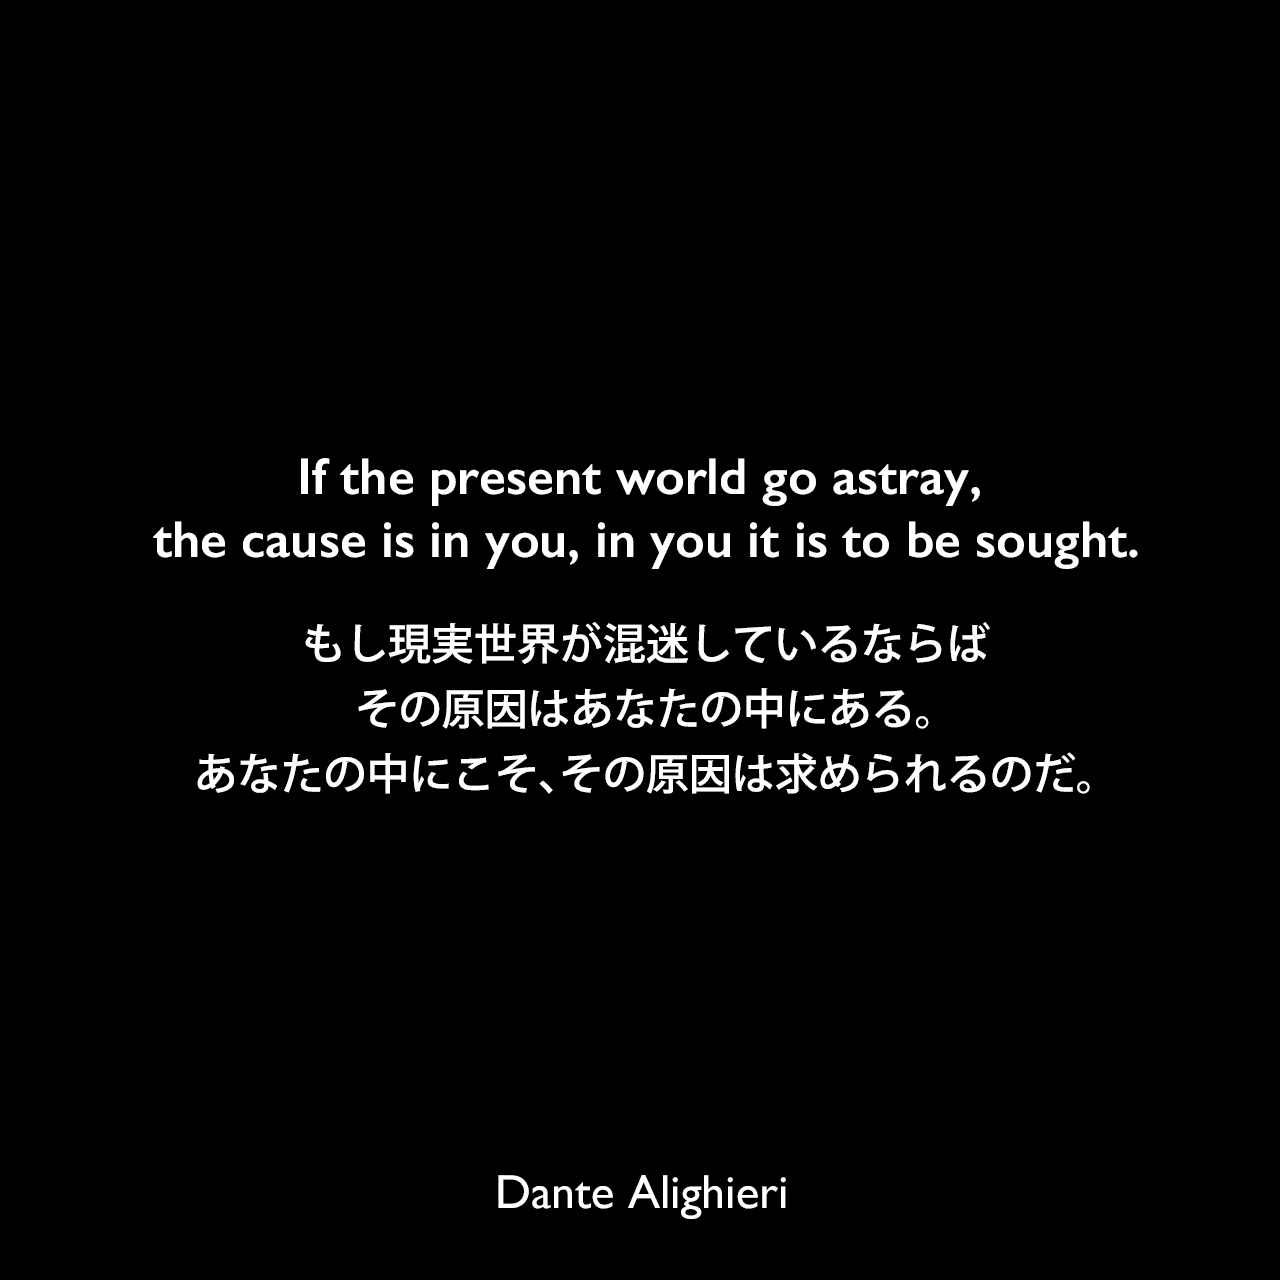 If the present world go astray, the cause is in you, in you it is to be sought.もし現実世界が混迷しているならば、その原因はあなたの中にある。あなたの中にこそ、その原因は求められるのだ。Dante Alighieri